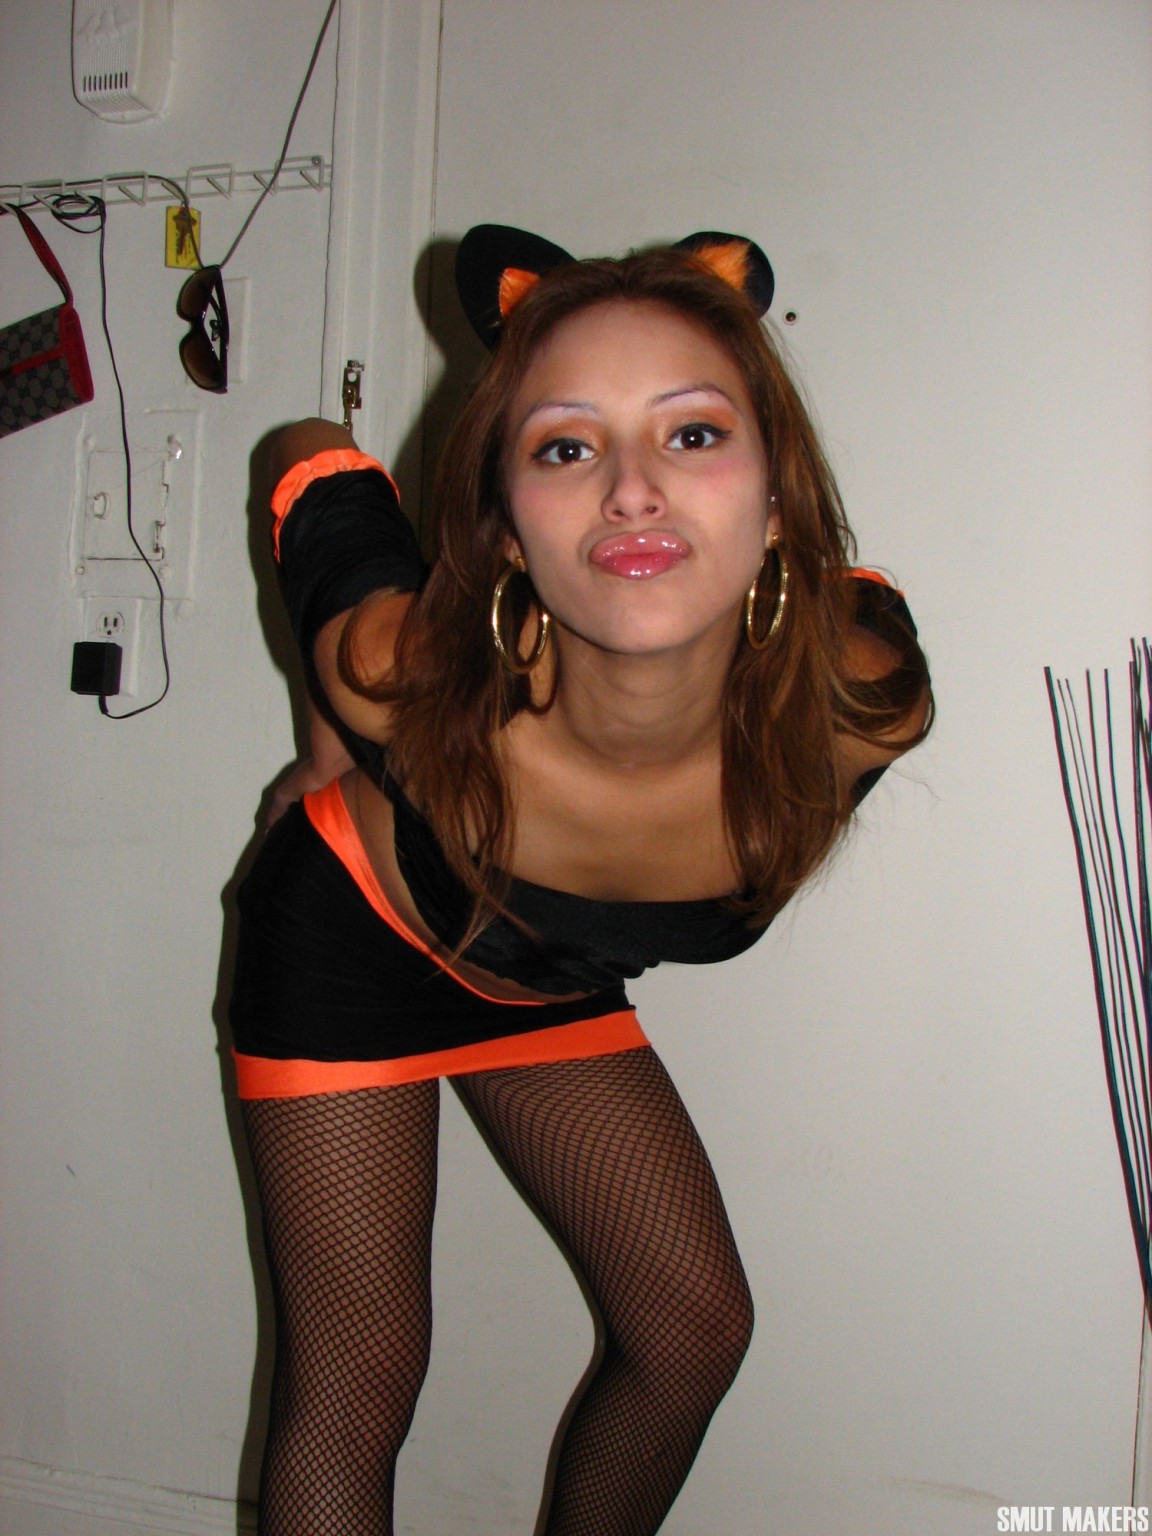 Latina teen is ready for Halloween in her cute Kitty costume